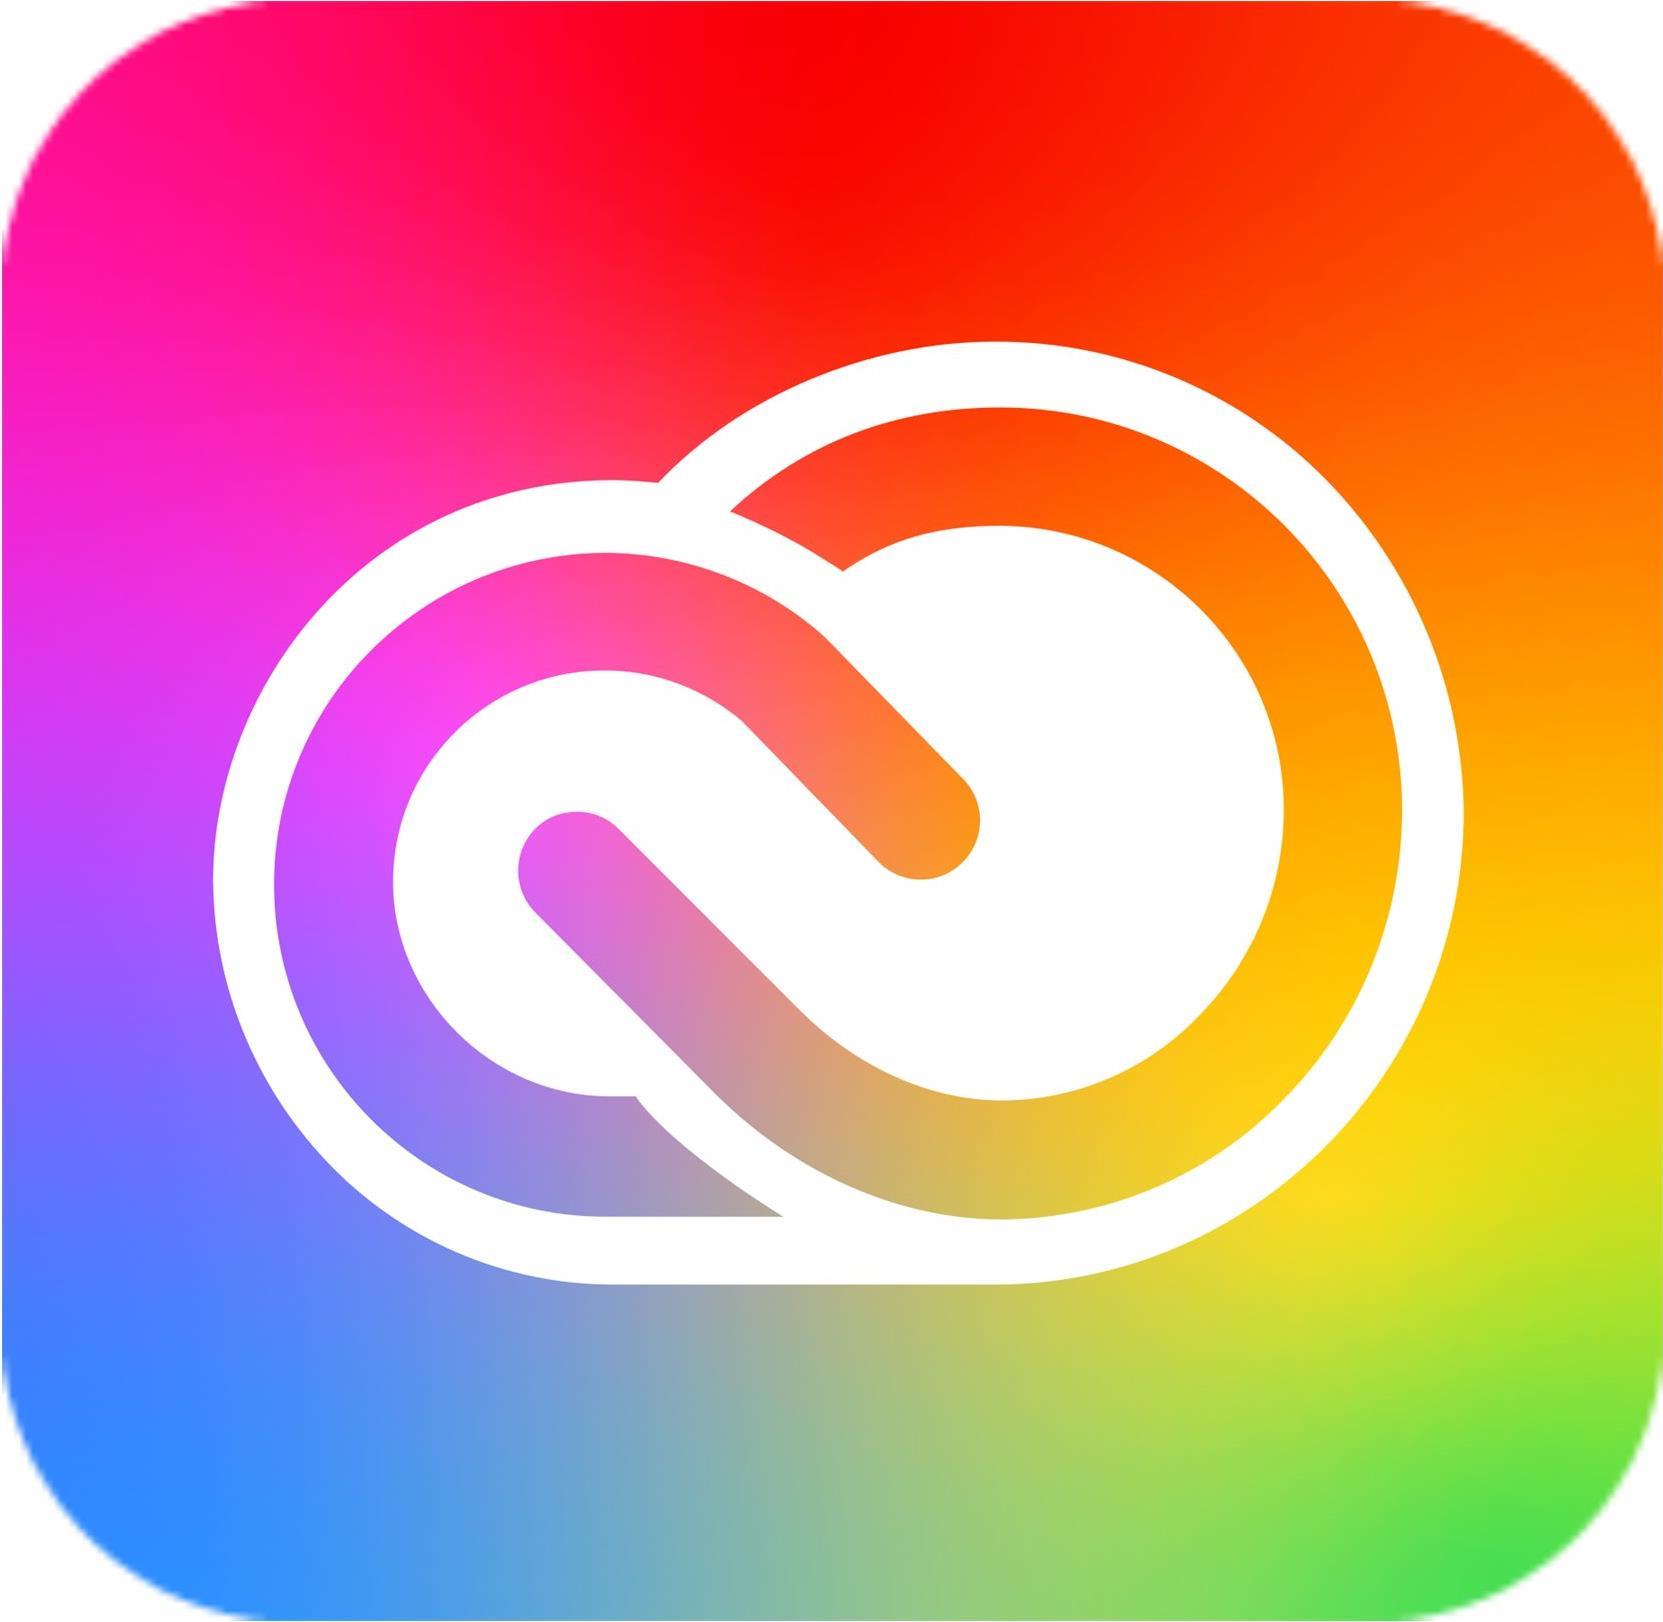 Adobe Creative Cloud for teams - All Apps - Subscription Renewal - 1 Benutzer - VIP Select - Stufe 14 (100+) - 3 years commitment - Win, Mac - EU English von Adobe